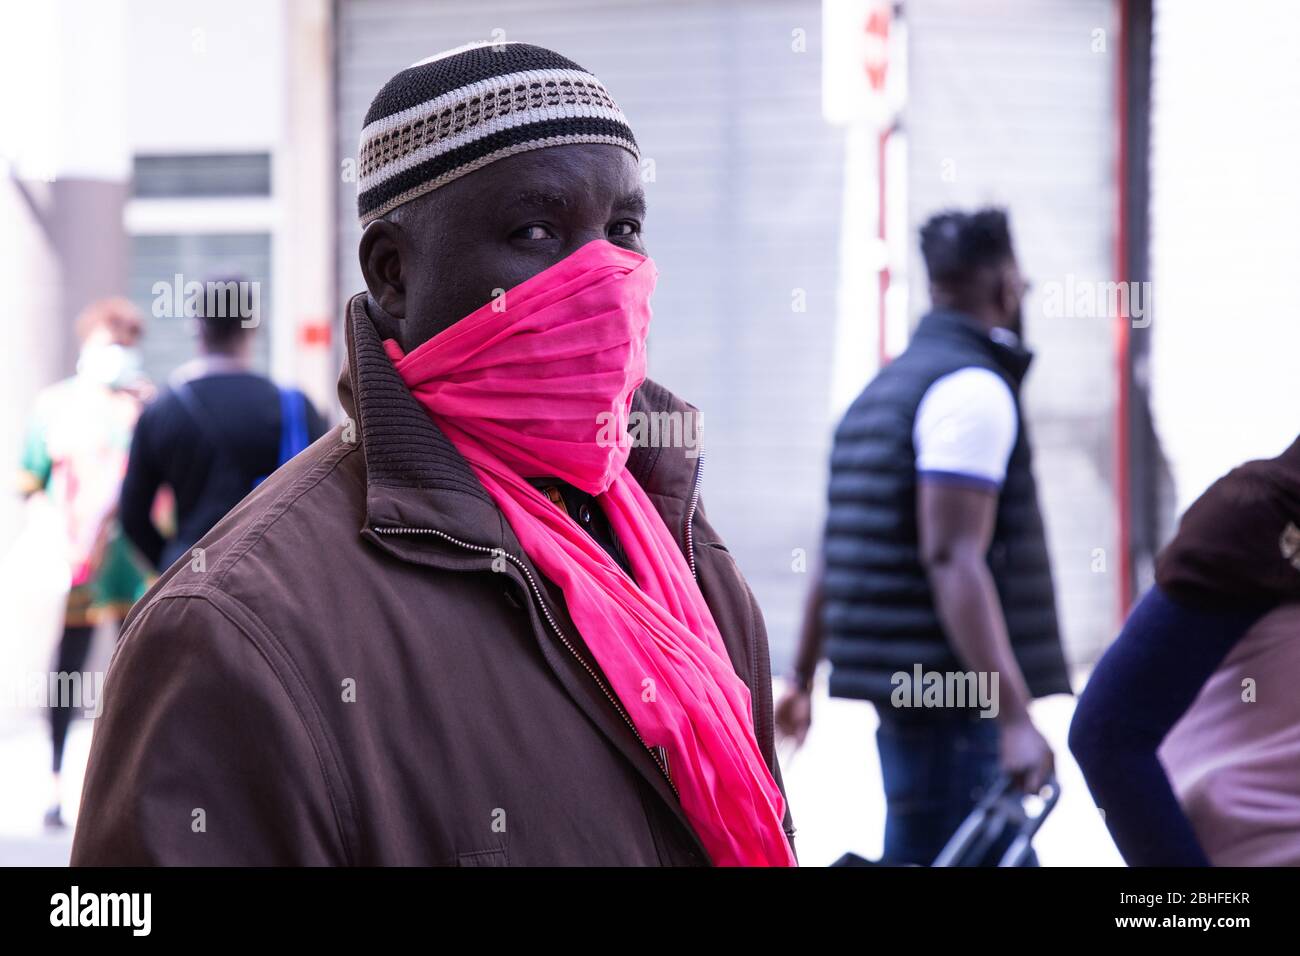 A Muslim man covering her mouth and nose with a scarf during Ramadan amid the corona virus pandemic.In Saint Denis, a Paris suburb where the population is predominantly Muslim, people line up at markets and butchers to prepare Ramadan meals in times of the pandemic. They wear masks to protect themselves from the virus, but social distancing is far from being fulfilled. Stock Photo